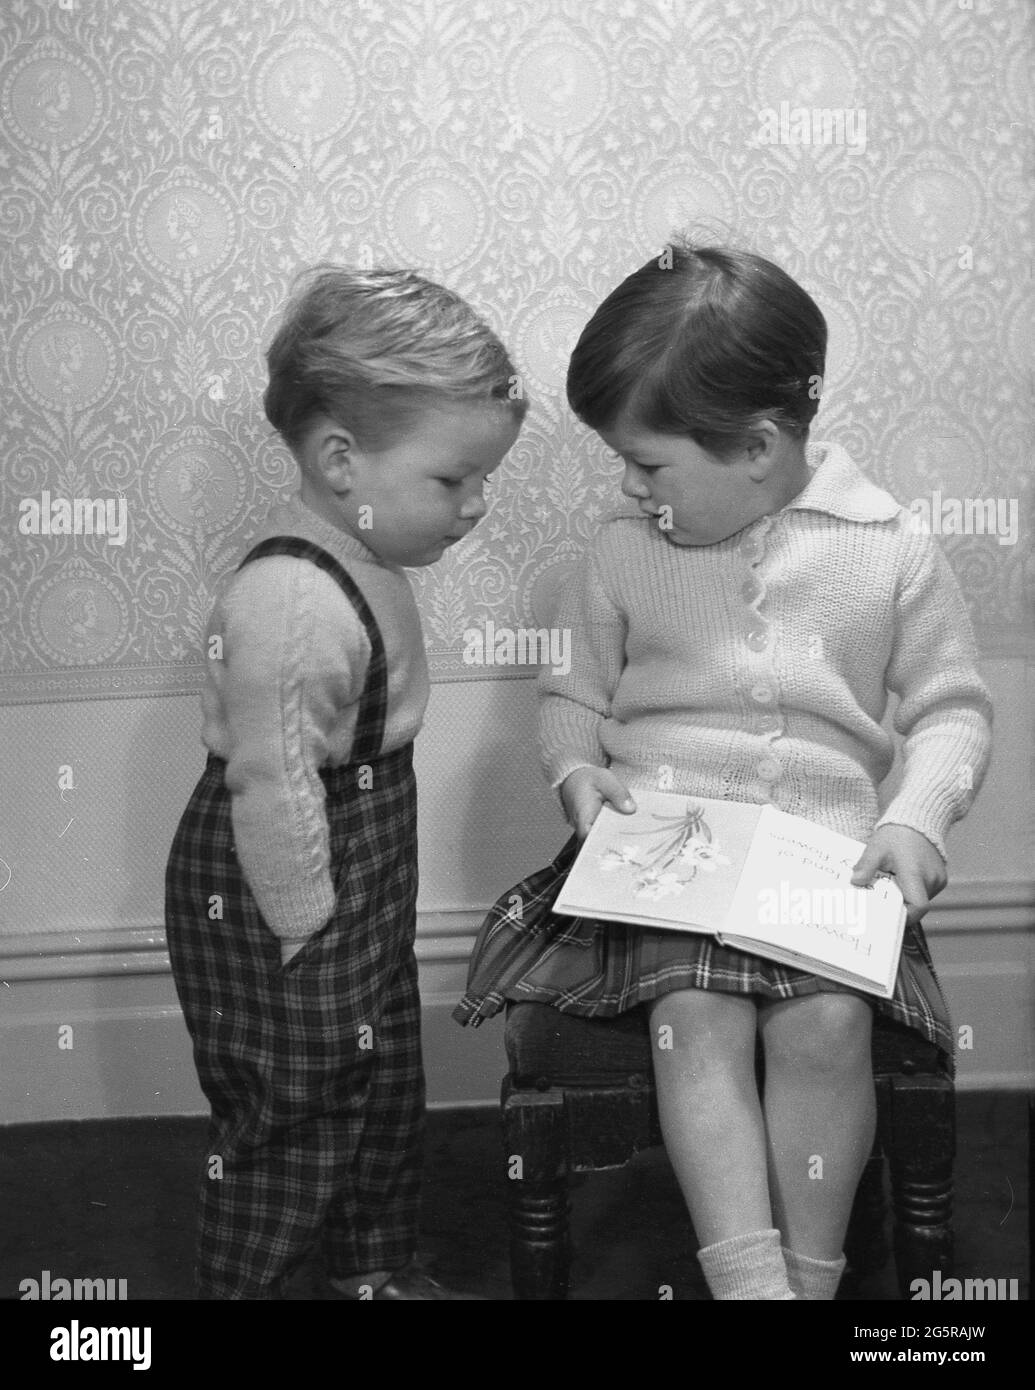 1960s, historical, what's that book you're reading? a little boy in tartan dungrees showing interest in his sister's book she has on her lap, a picture book of flowers, England, UK. Stock Photo